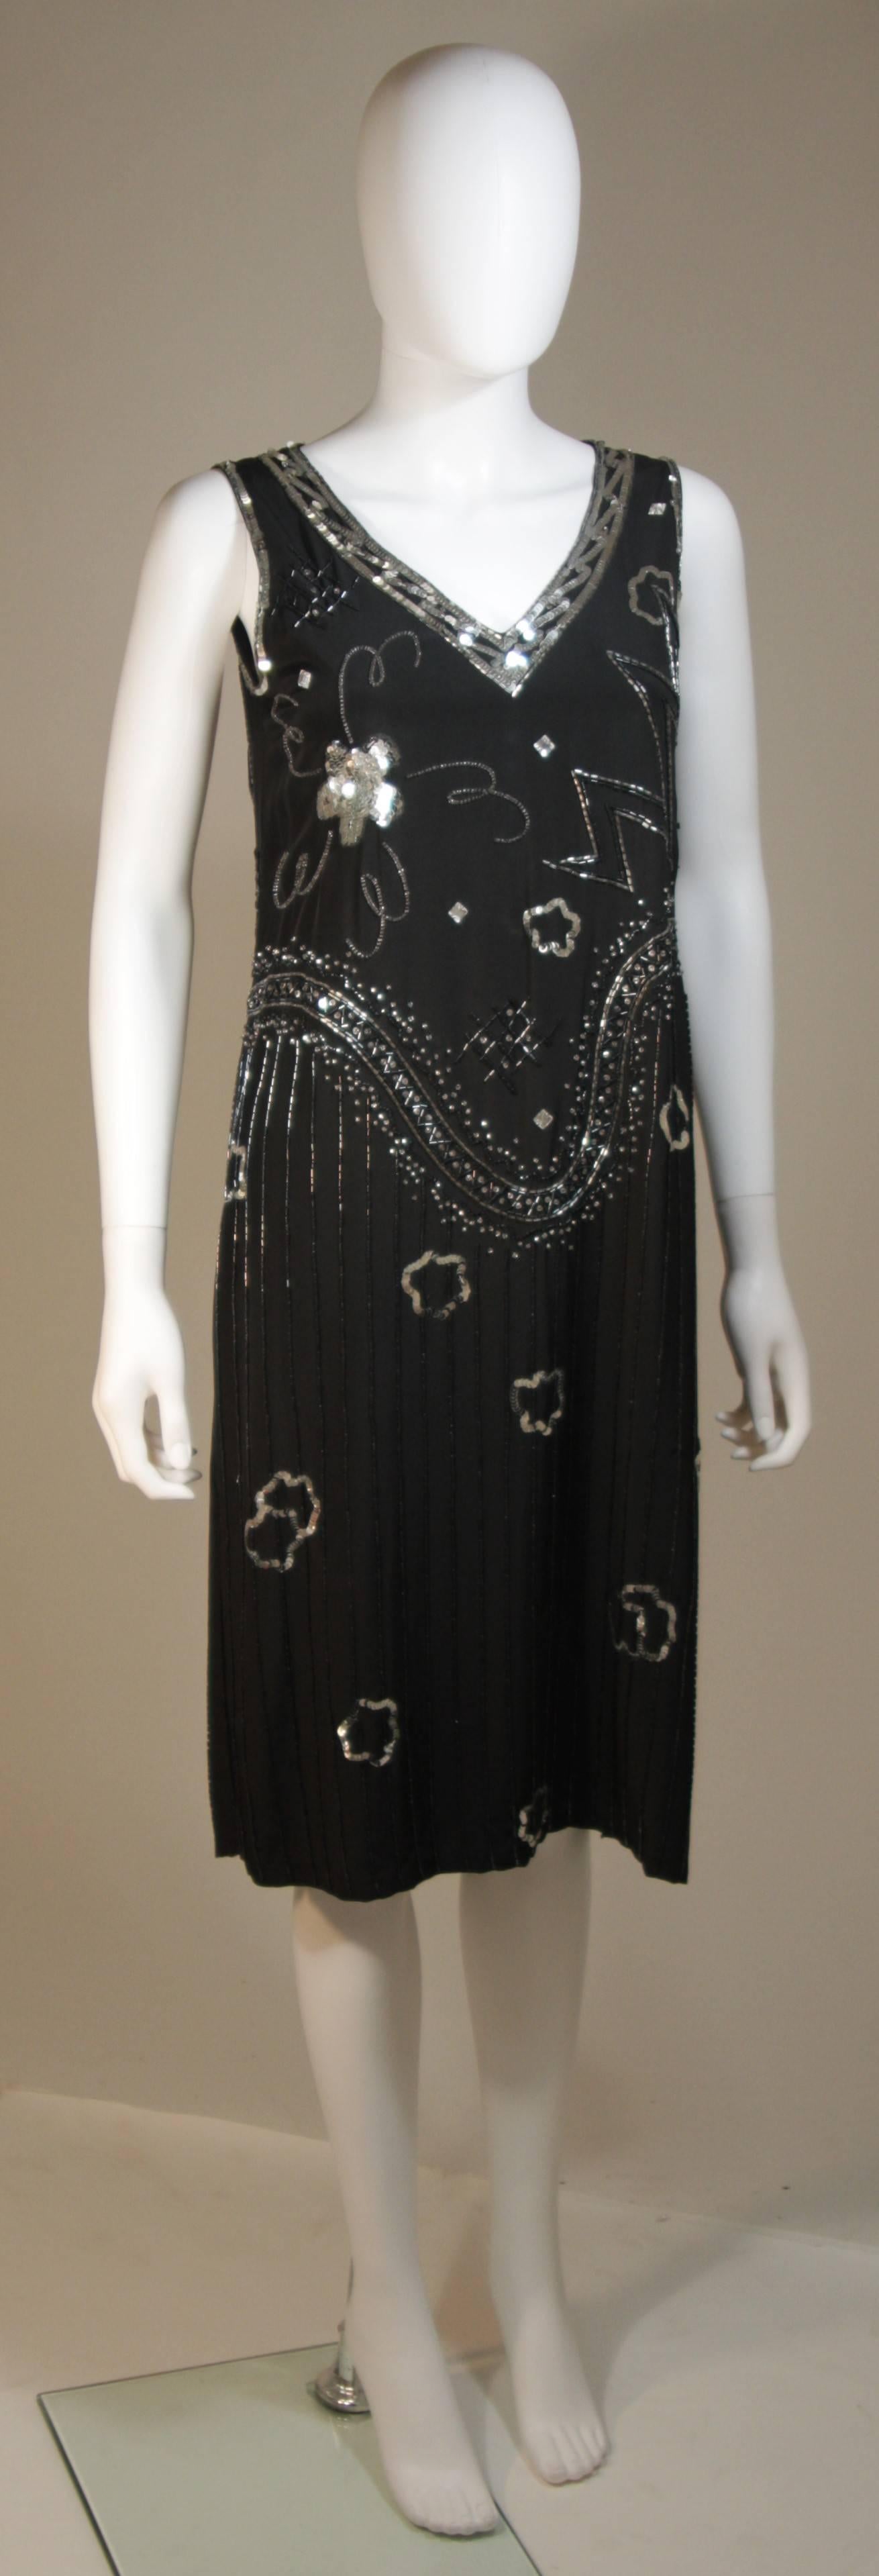 GIORGIO BEVERLY HILLS Sequin Embellished Deco Inspired Cocktail Dress Size 4-6 In Excellent Condition For Sale In Los Angeles, CA